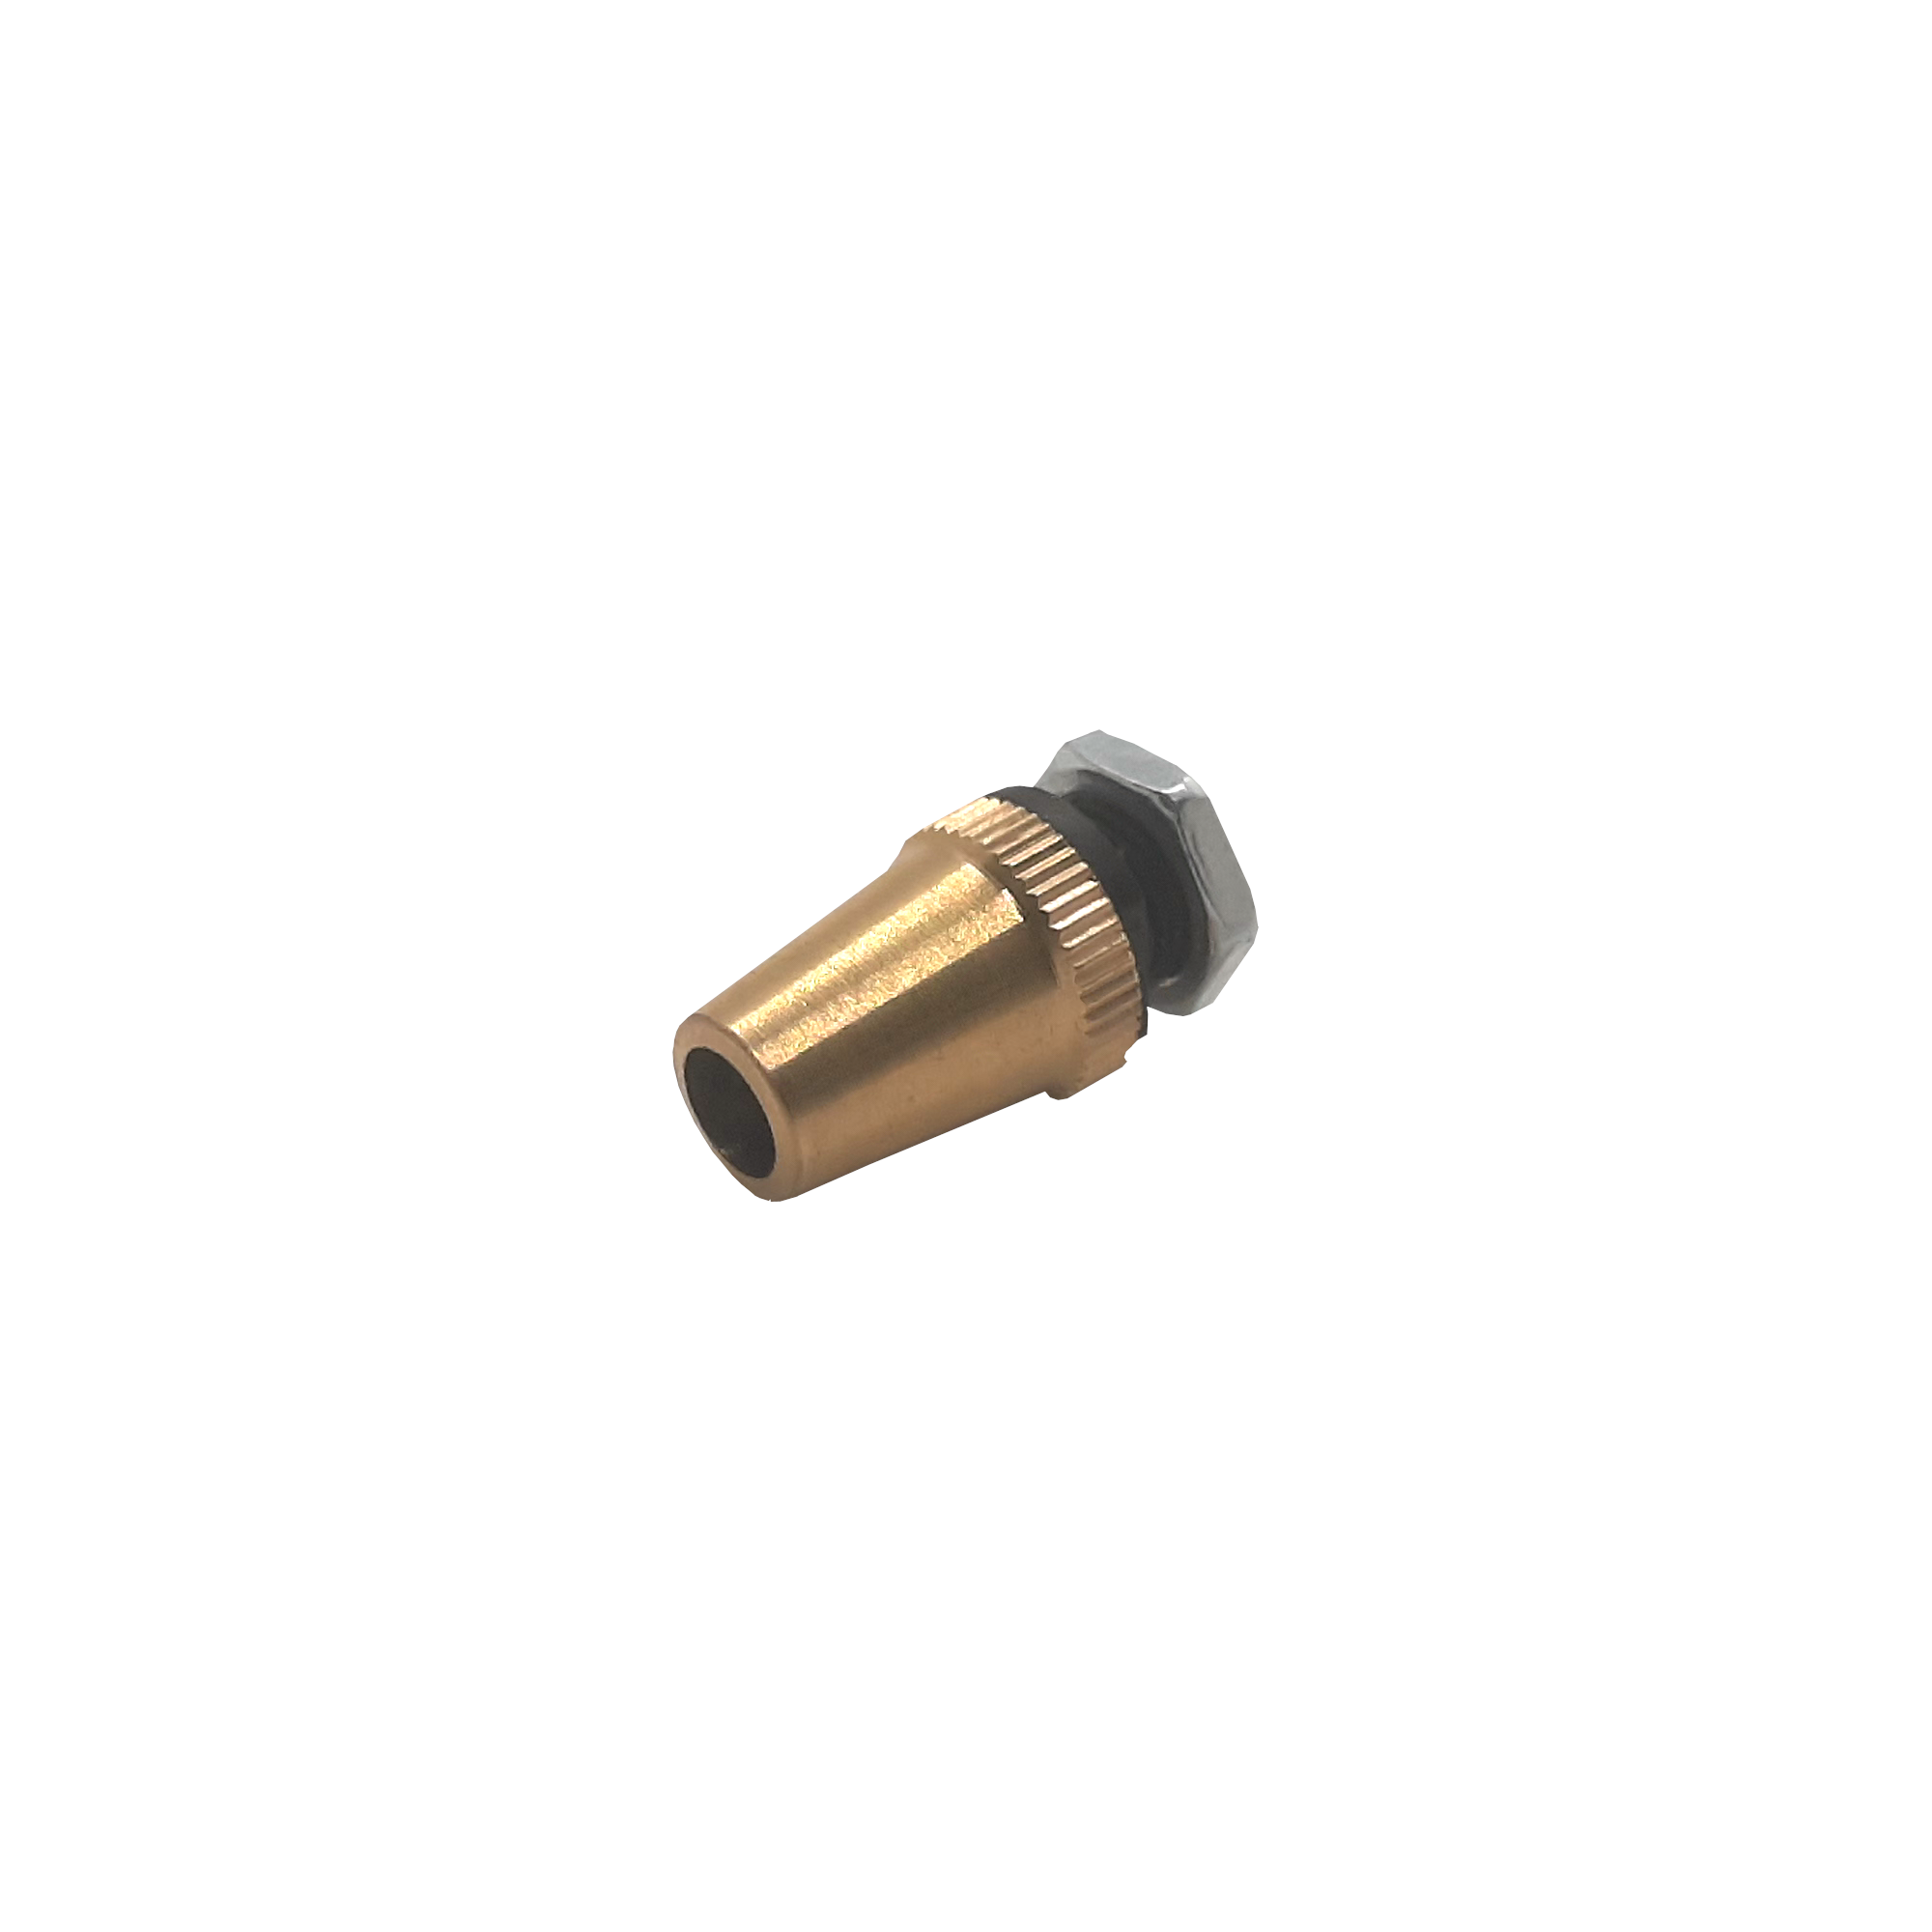 Product image of SG028 Brass Cord Grip